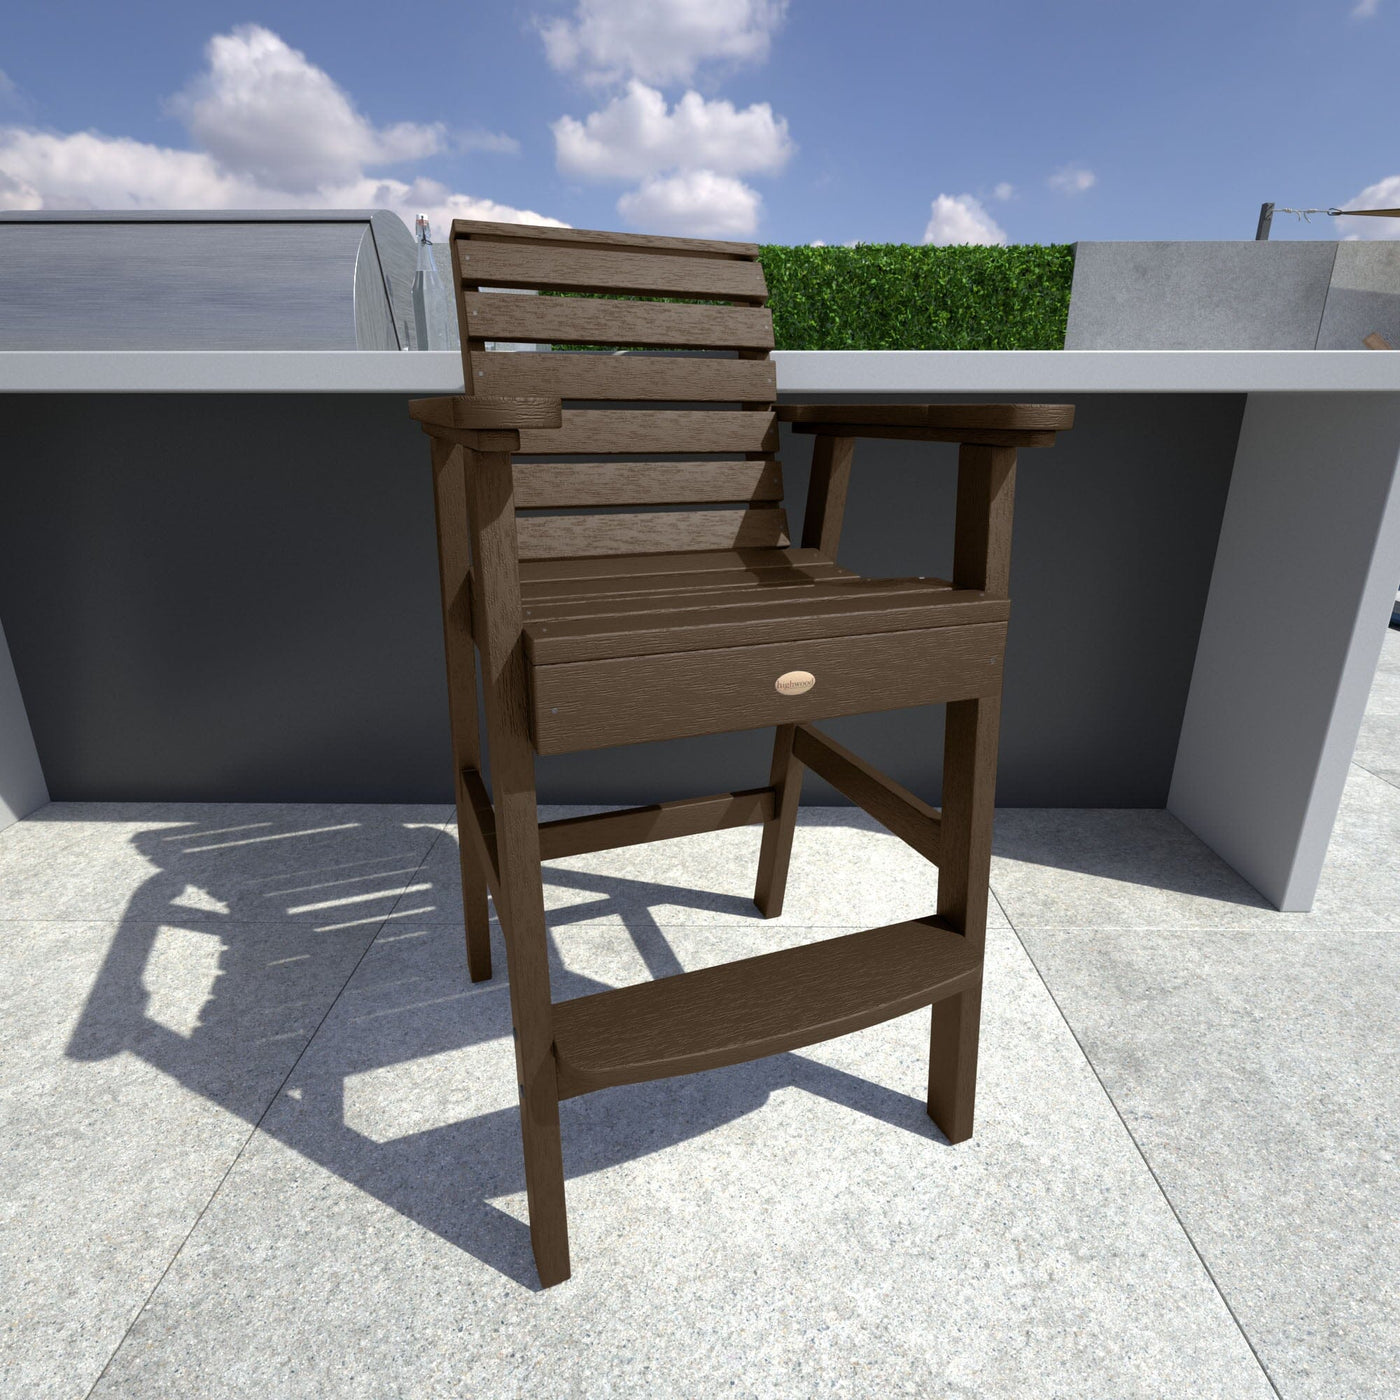 Brown Weatherly Bar Height Chair in outdoor kitchen